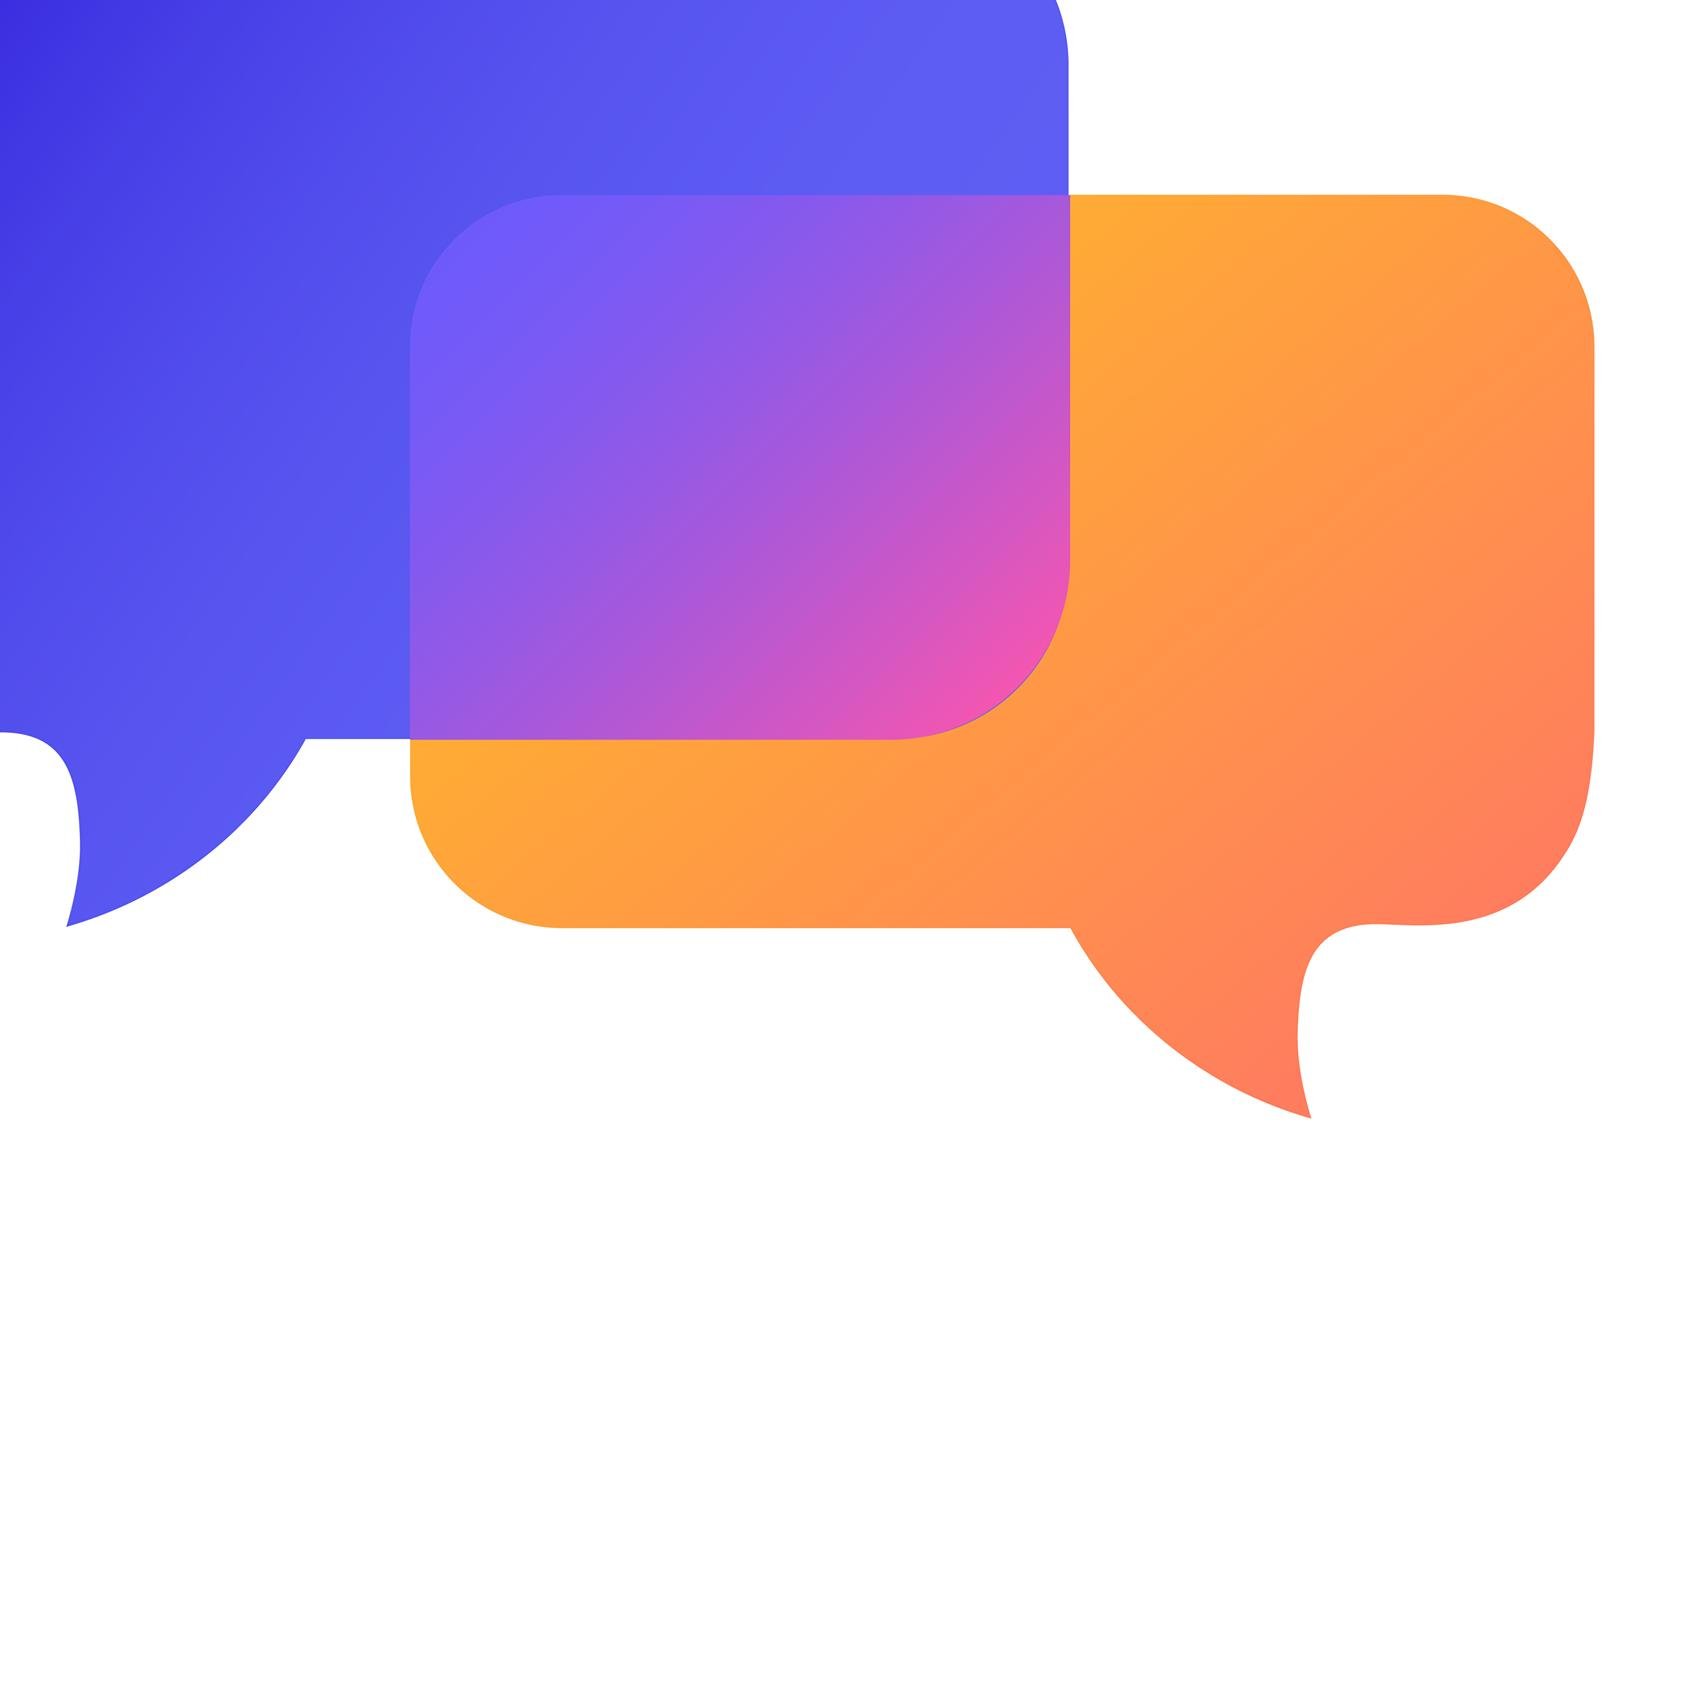 Promoting democratic dialogue and discussion across Europe 🇪🇺 Digital. With live-translation. Through 1:1 and group chats 👩‍💻 Check our Talking Europe App